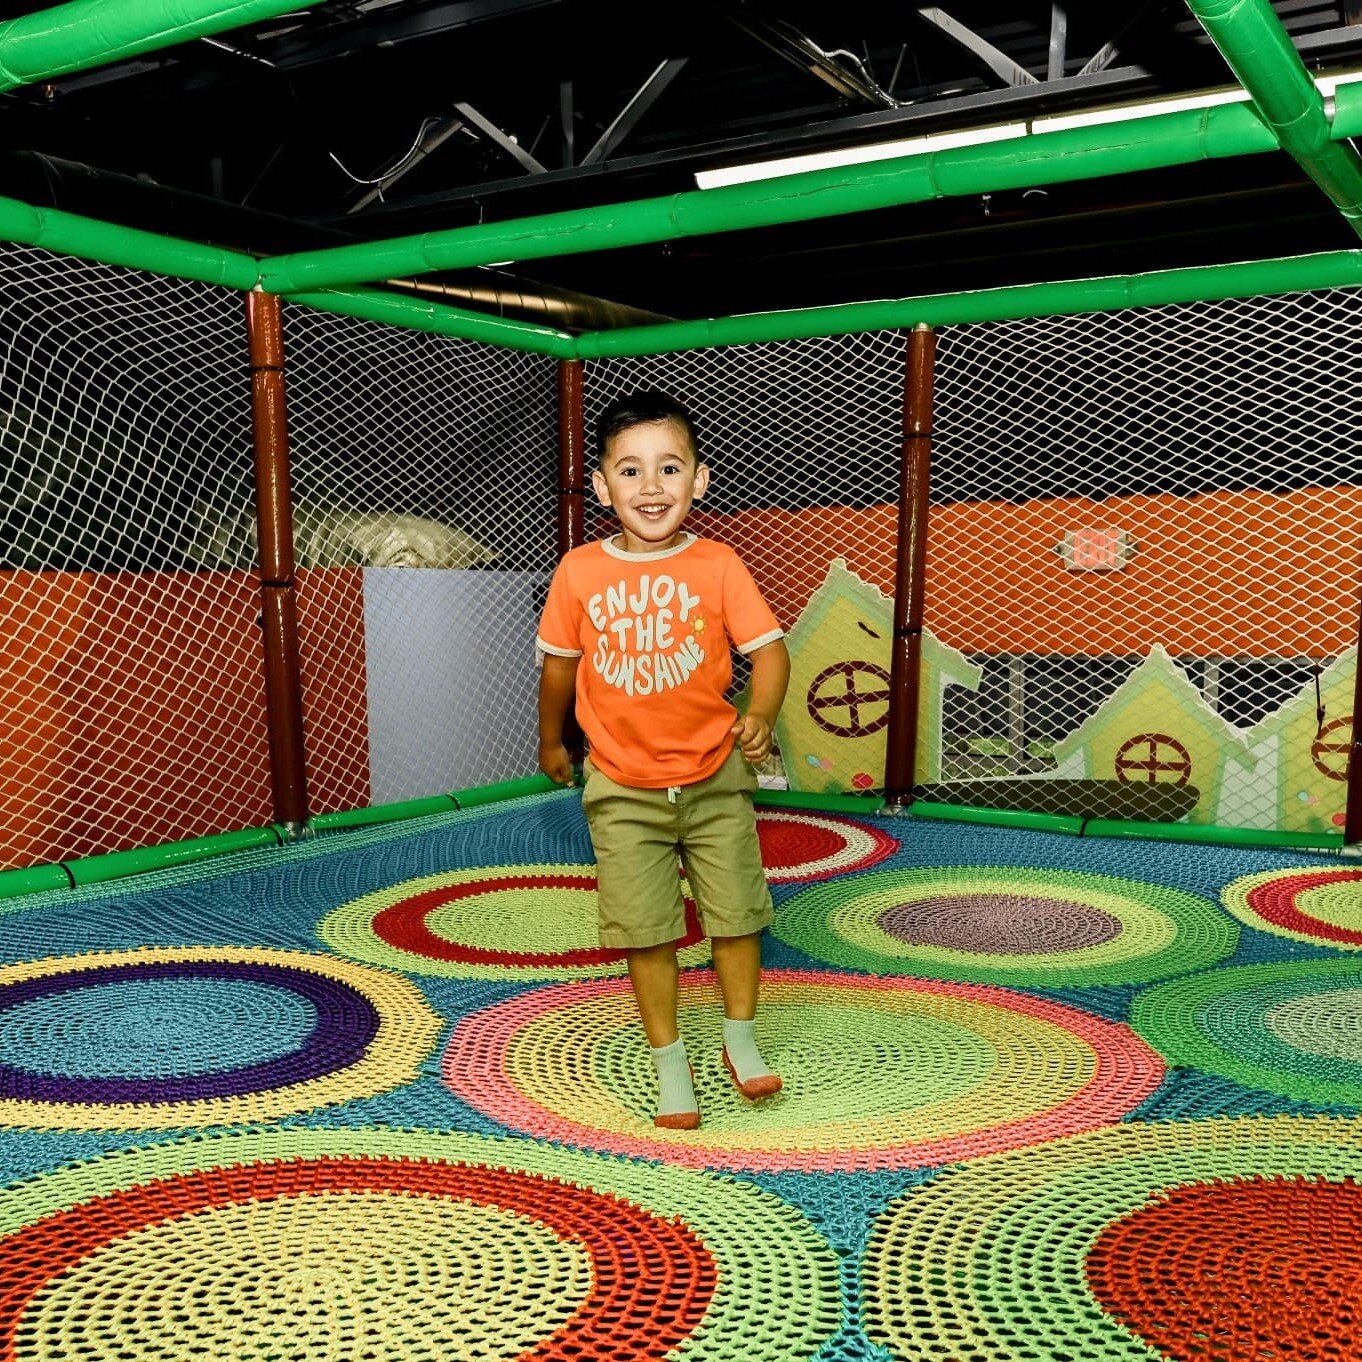 🚨ACTIVITY ALERT🚨
.
We look forward to meeting up at @tnkidsco. This is one of our favorite family-owned indoor playgrounds! It has three levels of fun for kiddos to crawl around, with tube slides to access each. It's accommodating for all ages and 